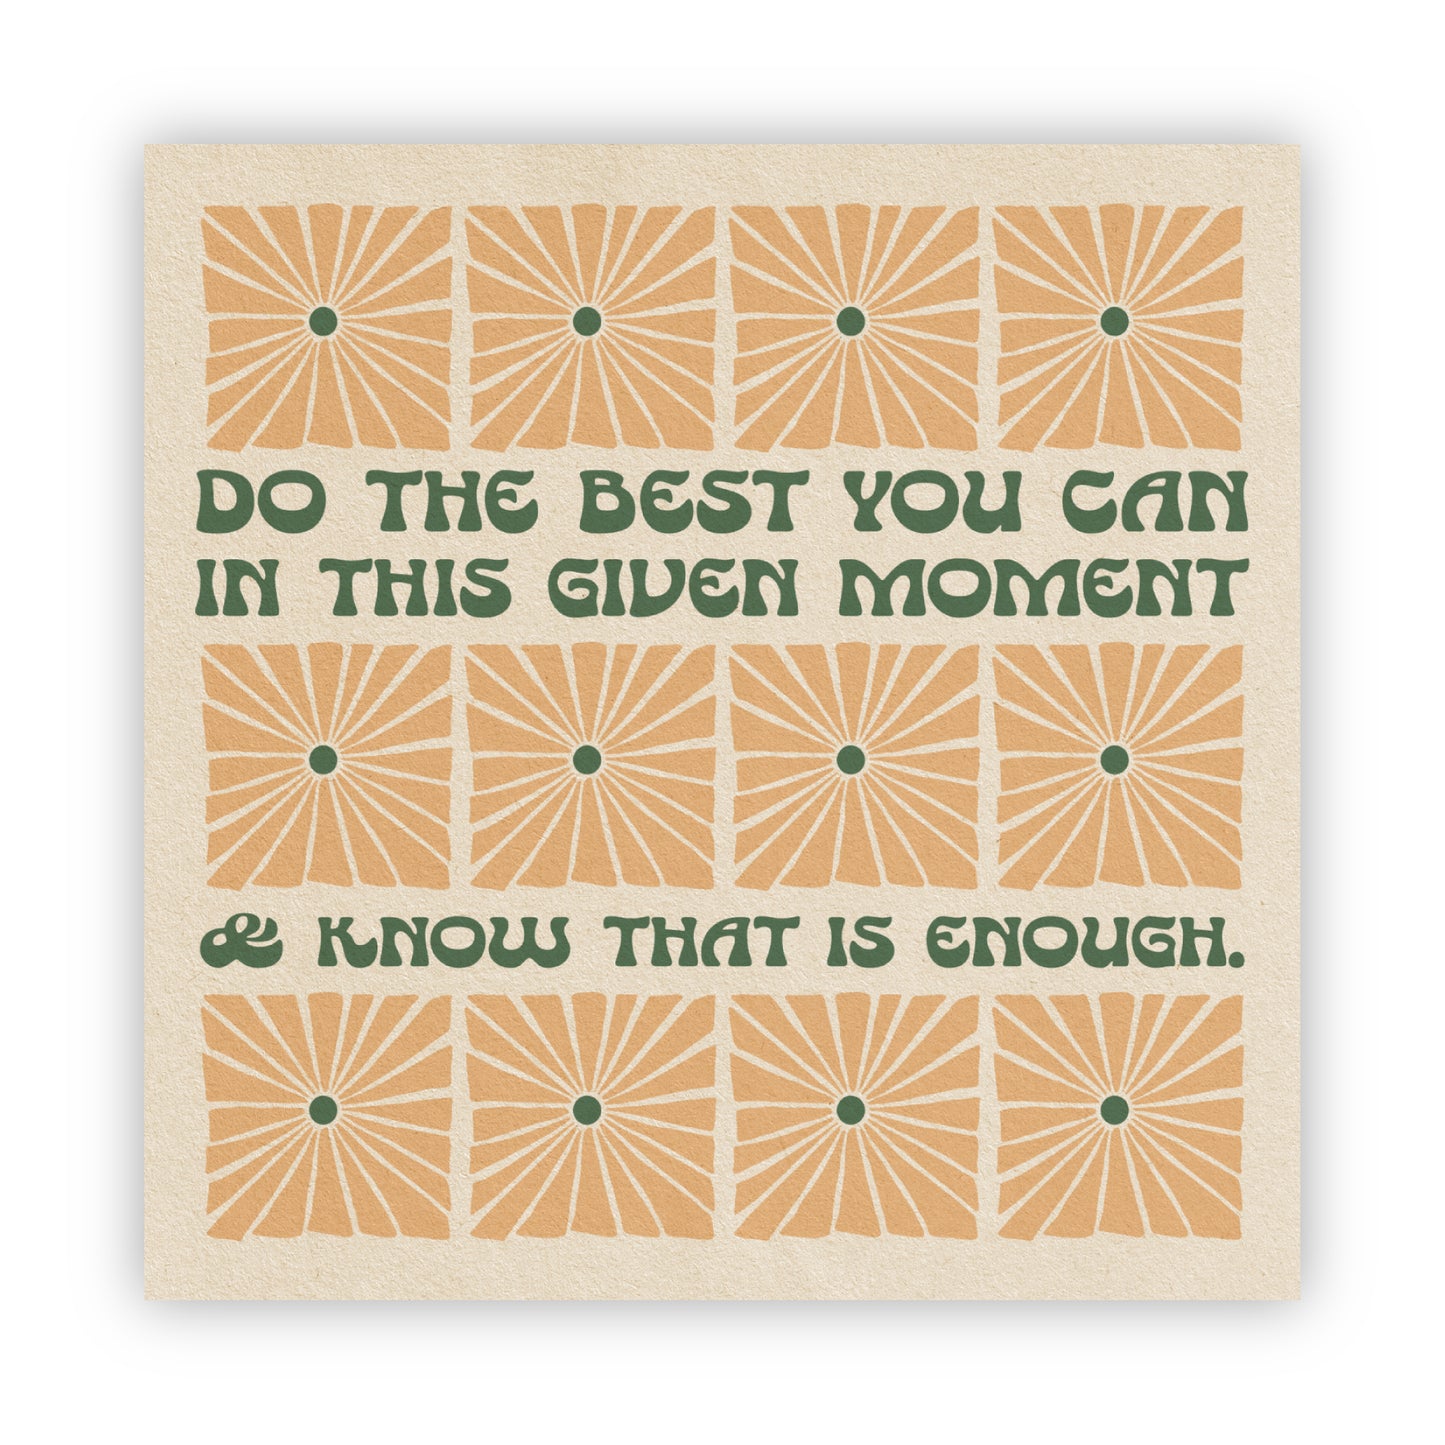 Do The Best You Can - Vinyl Sticker